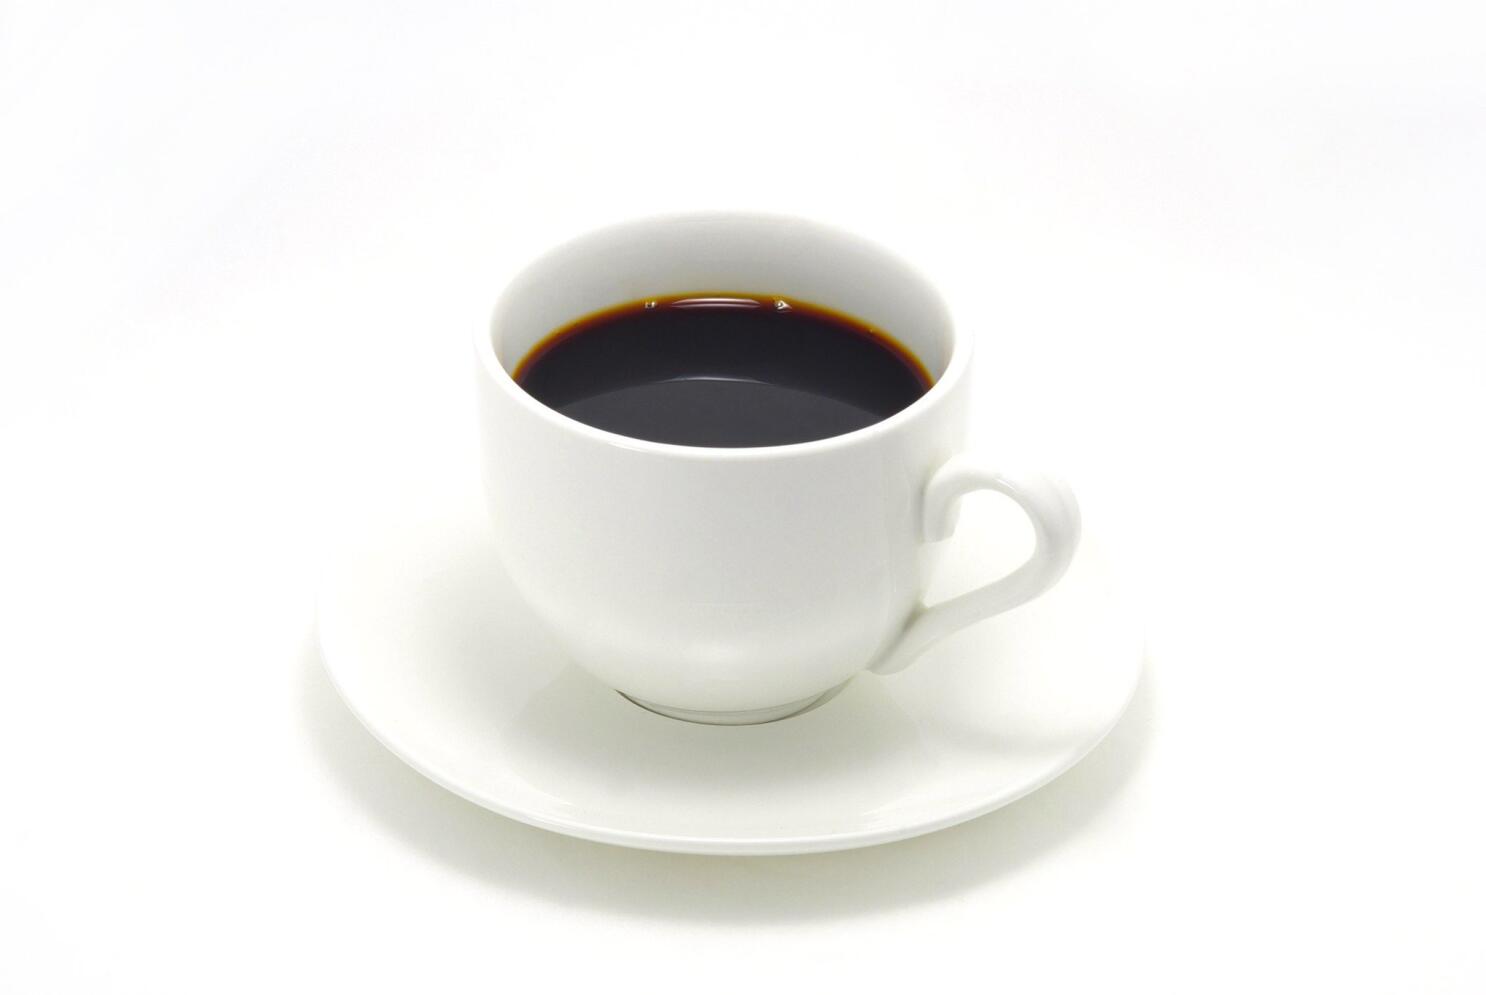 How much coffee is healthy? Three cups cuts stroke, heart attack risk